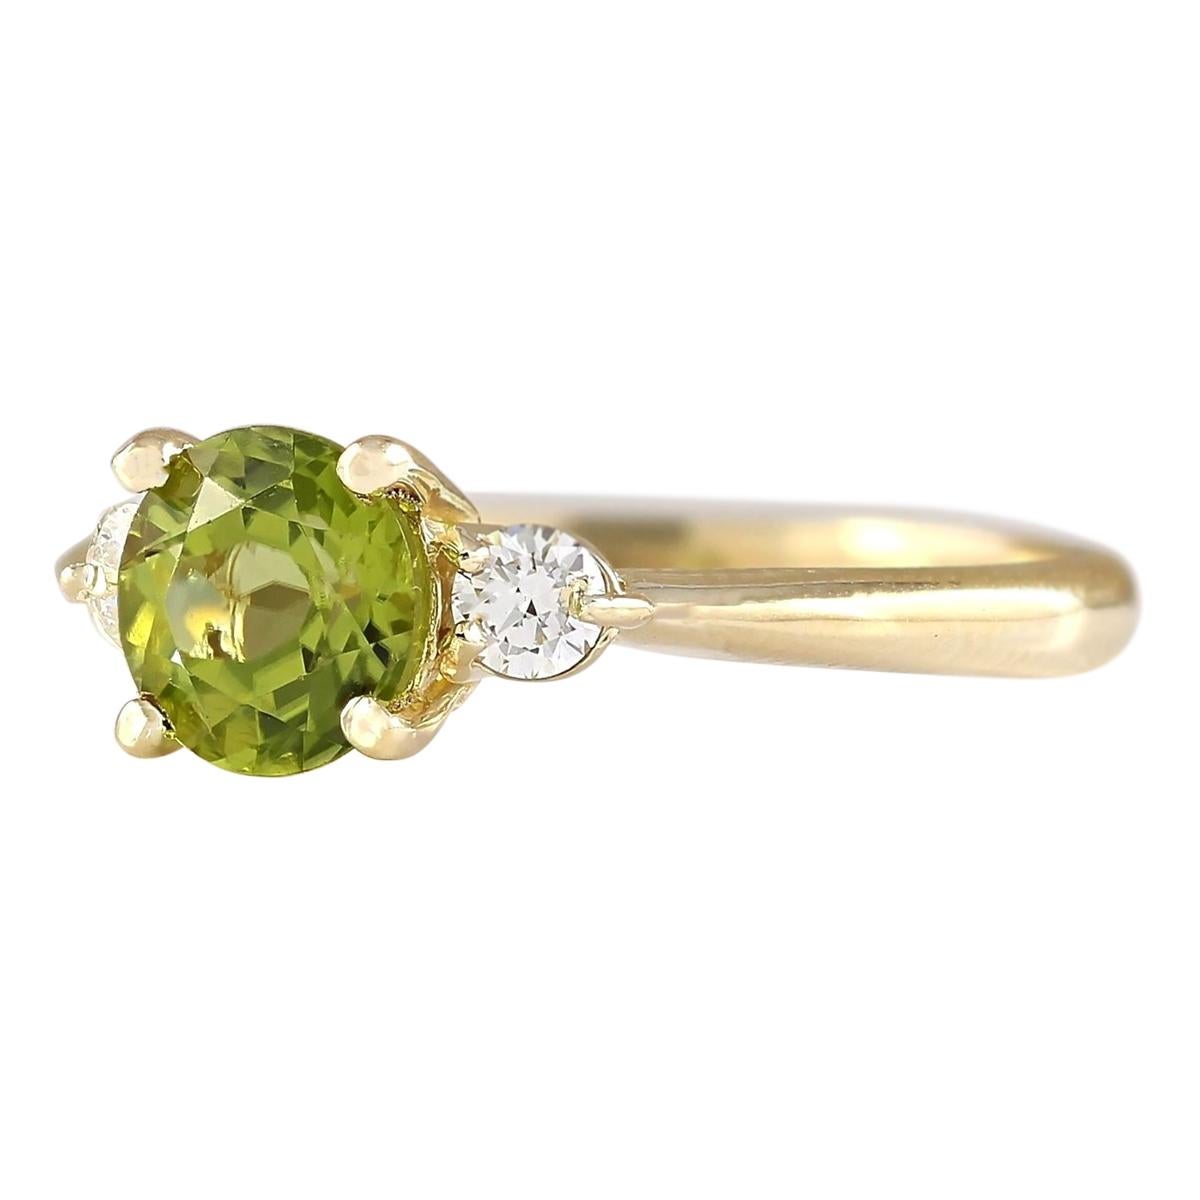 Stamped: 14K Yellow Gold
Total Ring Weight: 2.2 Gram
Total Natural Peridot Weight is 1.20 Carat (Measures: 6.00x6.00 mm)
Color: Green
Total Natural Diamond Weight is 0.20 Carat
Color: F-G, Clarity: VS2-SI1
Face Measures: 6.00x11.50 mm
Sku: [703251W]